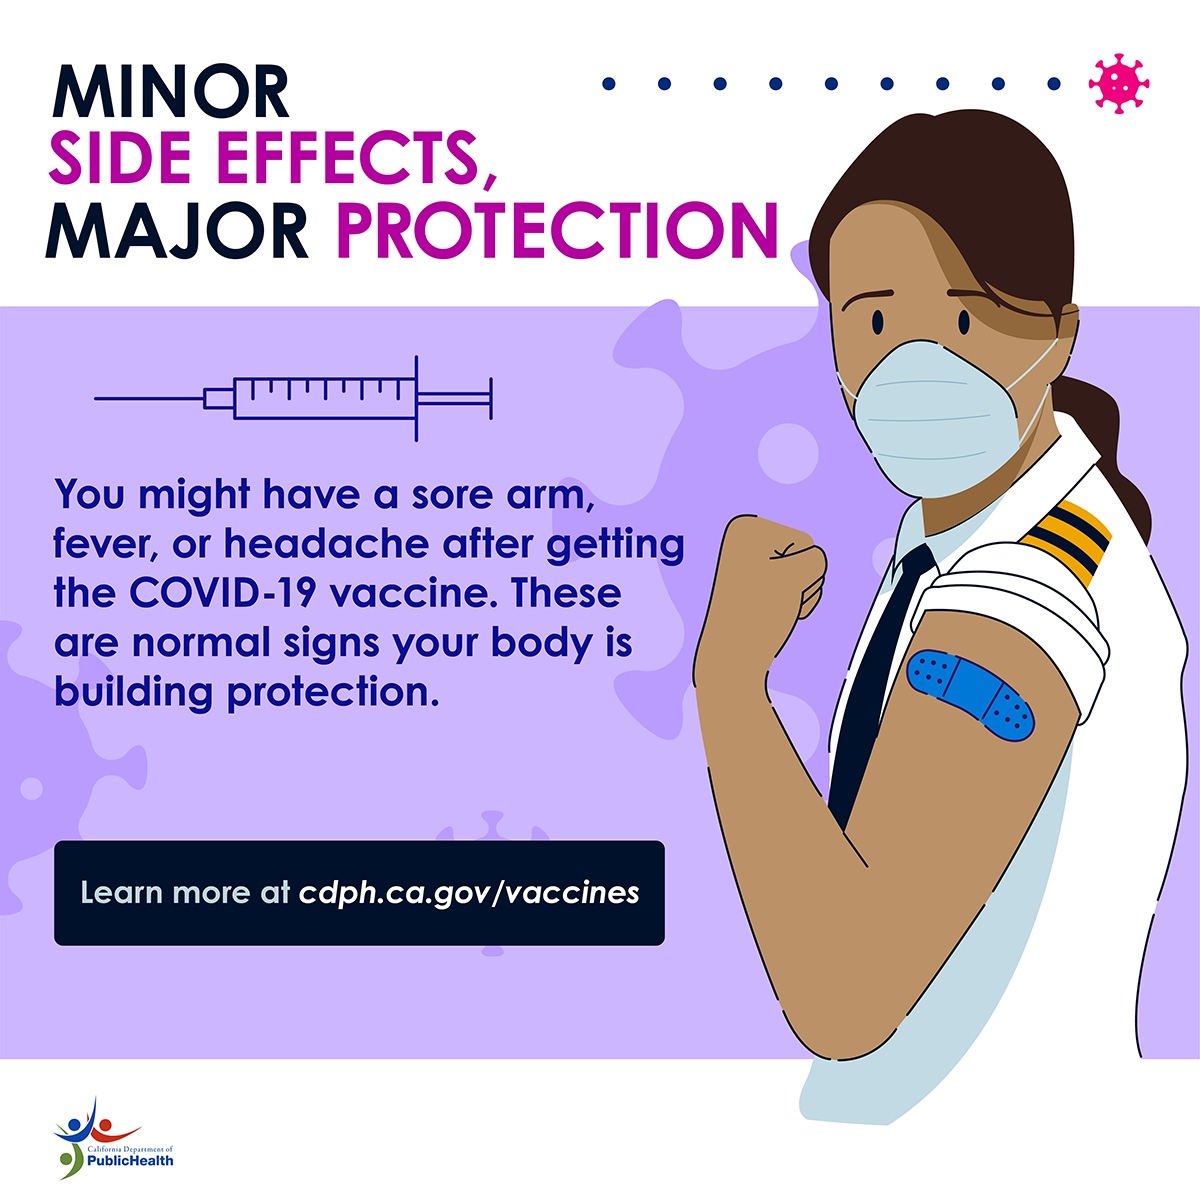 Minor side effects, major protections. You might have a sore arm, fever, or headache after getting the COVID-19 vaccine. These are normal signs your body is building protection.